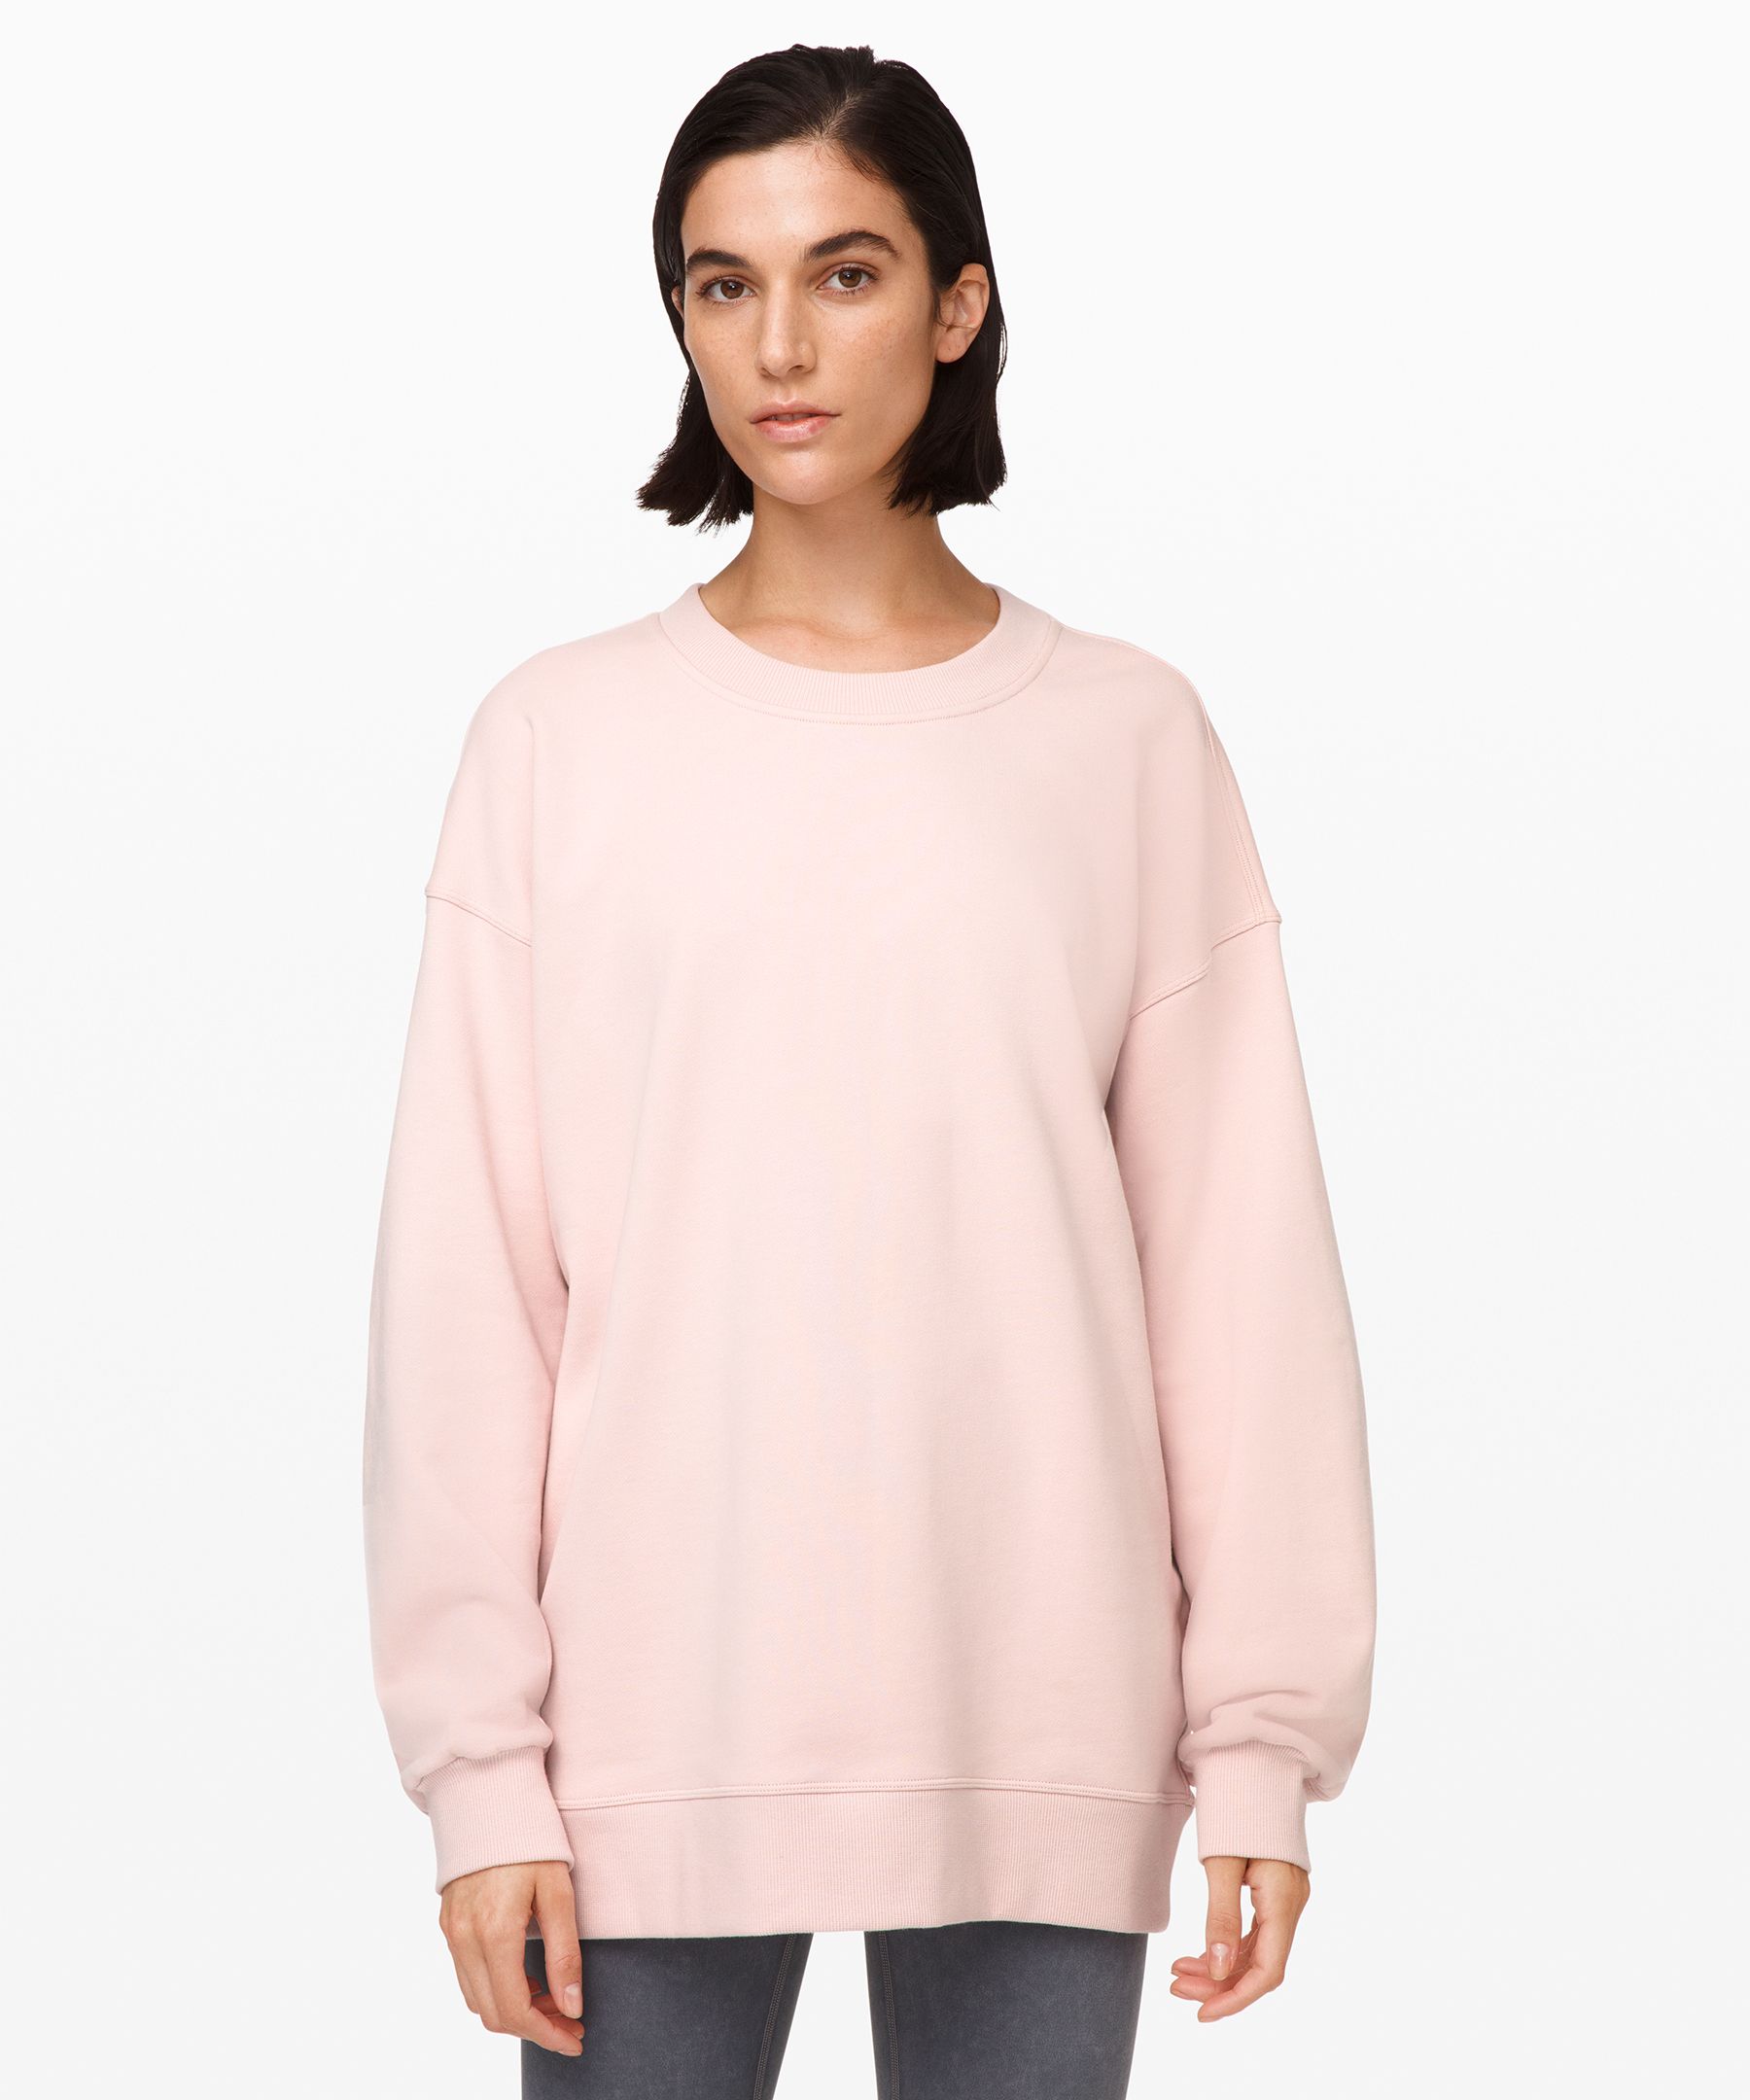 Lululemon Perfectly Oversized Crew In Pink Bliss